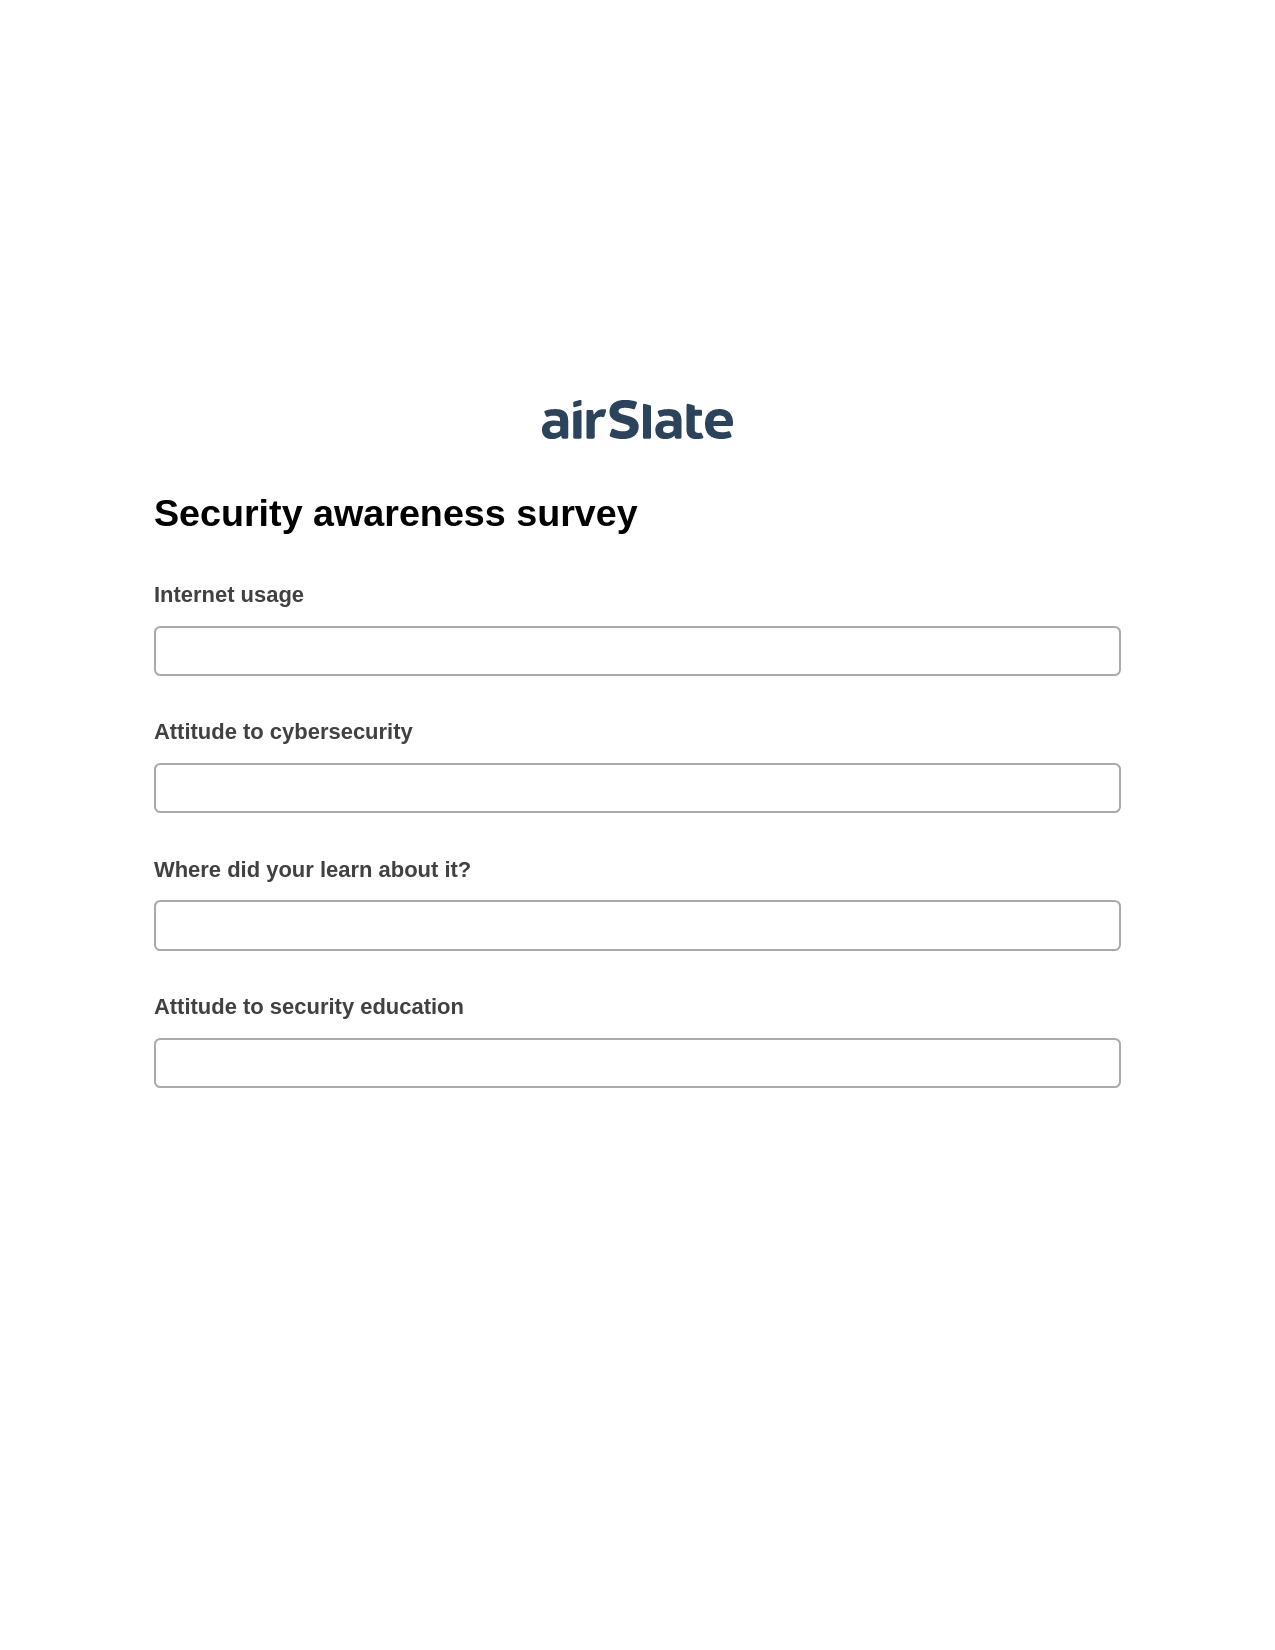 Security awareness survey Pre-fill from Excel Spreadsheet Bot, Add Tags to Slate Bot, Export to NetSuite Record Bot